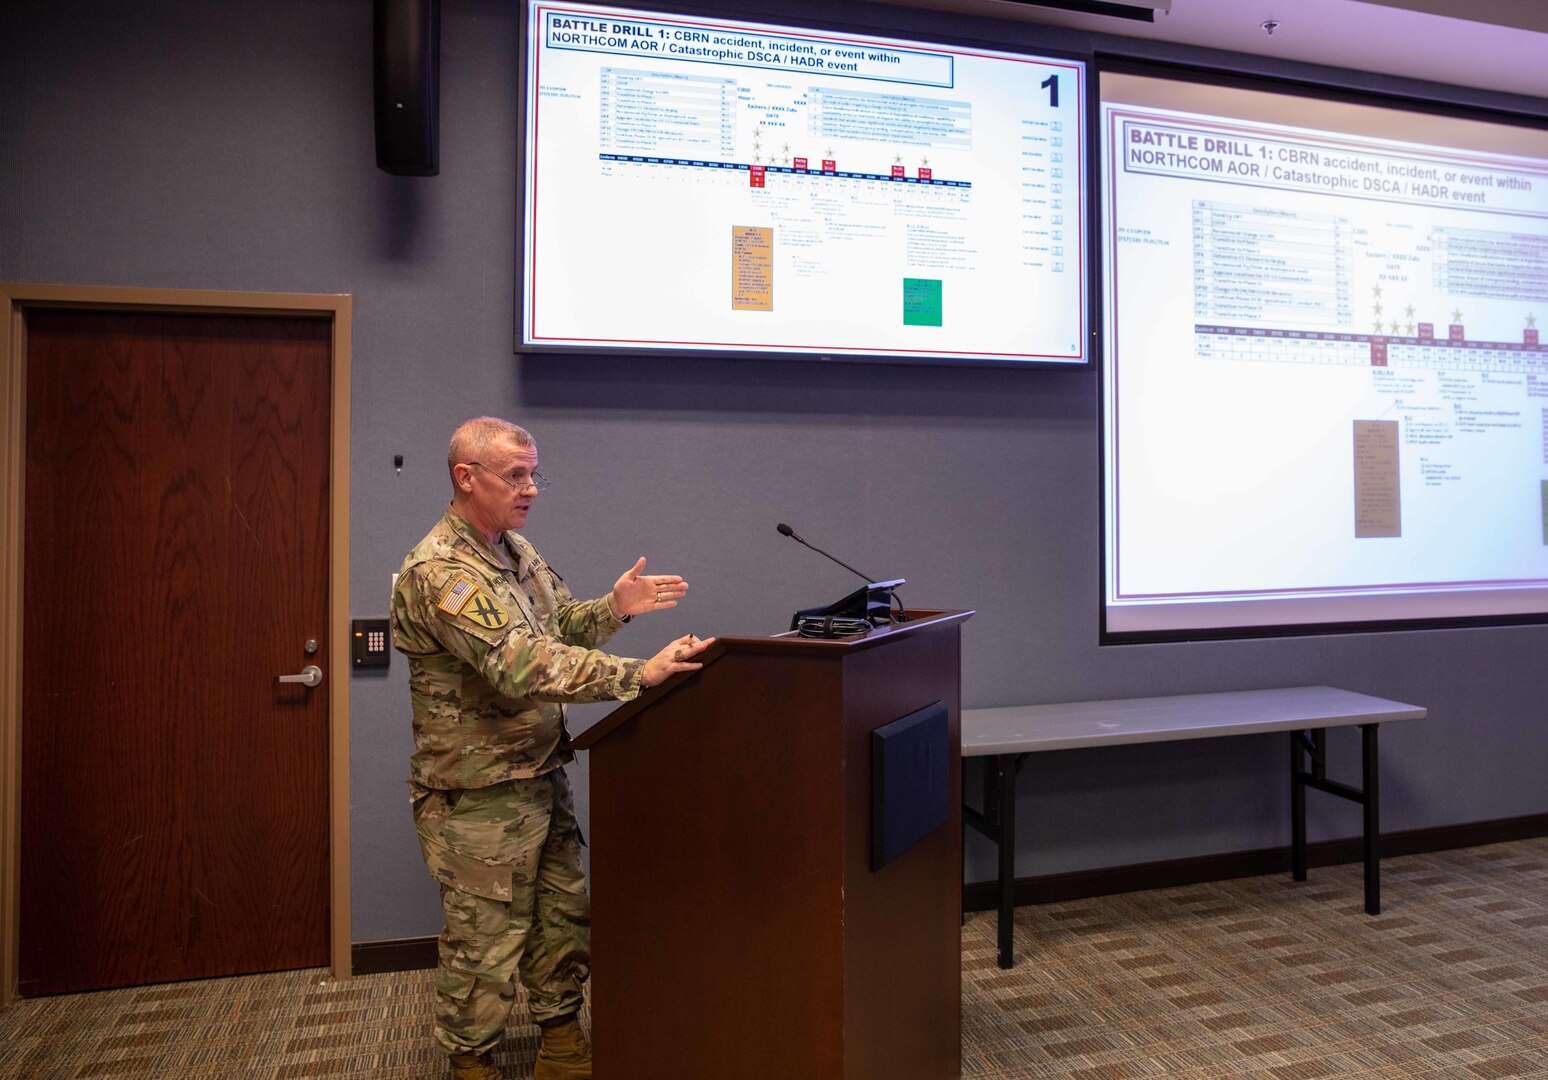 U.S. Army Lt. Col. Donald Thompson, Joint Task Force Civil Support (JTF-CS) current operations division chief, briefs JTF-CS and Defense Chemical, Biological, Radiological and Nuclear (CBRN) Response Force (DCRF) personnel during the command’s Exercise Sudden Response 2020 (SR20) staff academics conference, held at the command’s headquarters, Jan. 6-8. During the event, JTF-CS and DCRF personnel focused on major movements and friction points that would be encountered during the deployment and operation phases of SR20. (Official DoD photo by Mass Communication Specialist 3rd Class Michael Redd/RELEASED)